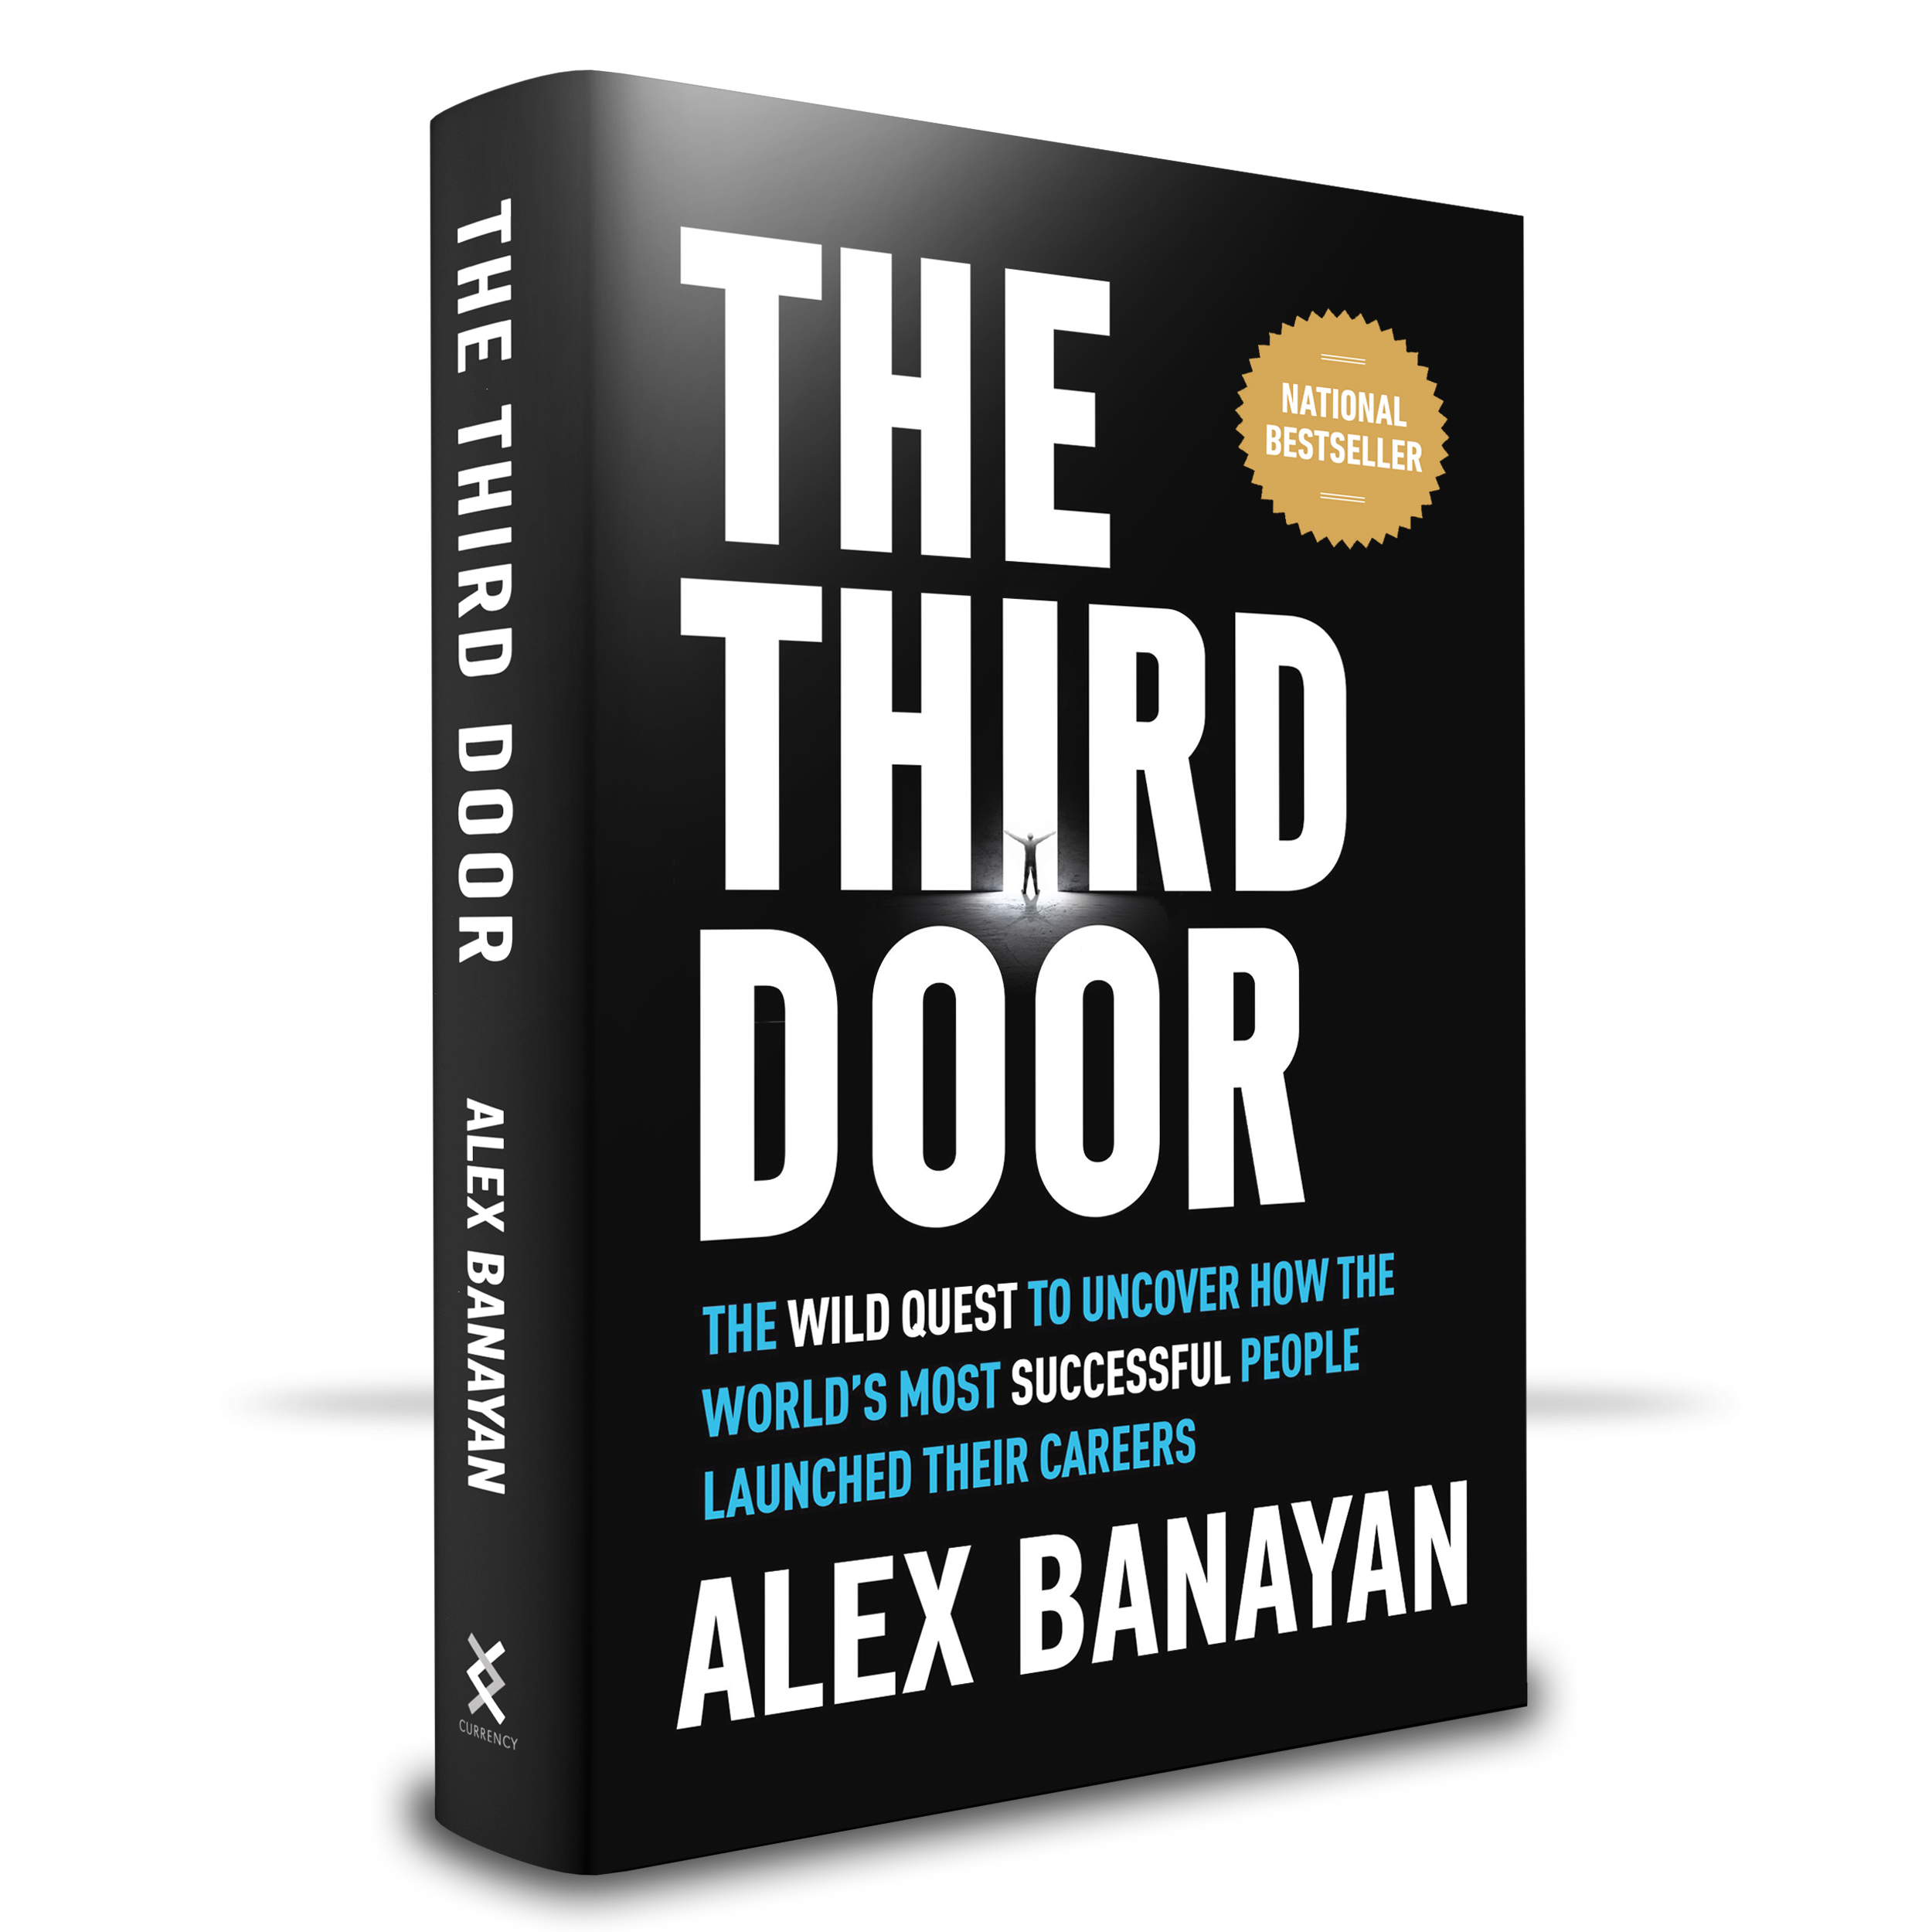 The Third Door Book Tour 2018: Events, Signings, Readings, and More